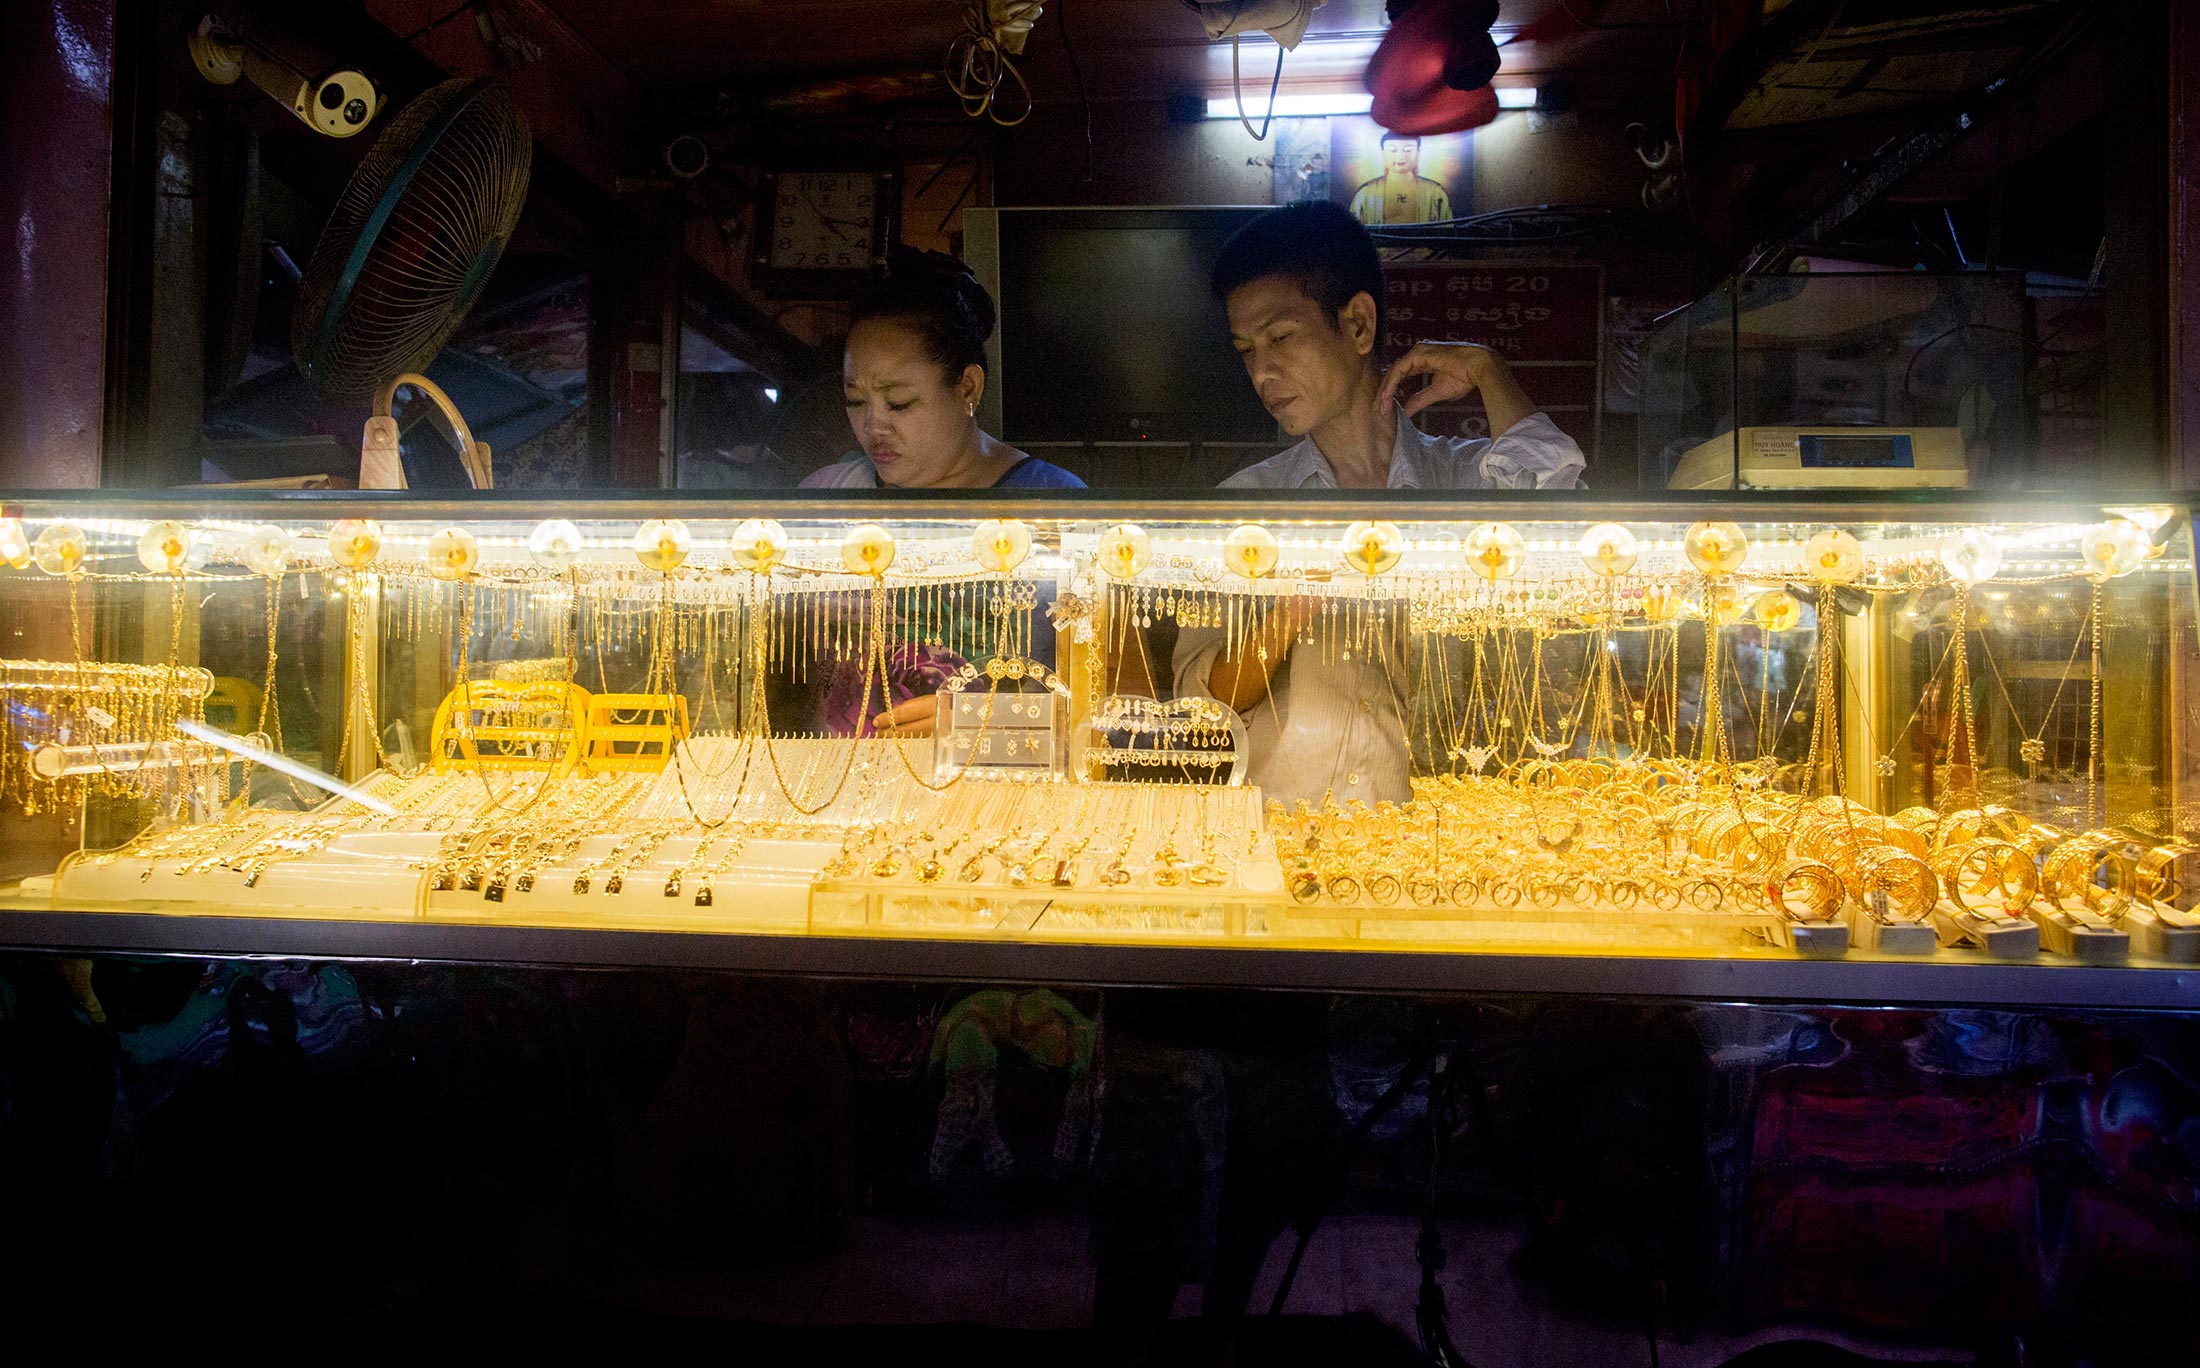 Gold jewelry sits on display at a store in Phnom Penh, Cambodia, on Sept. 25.
